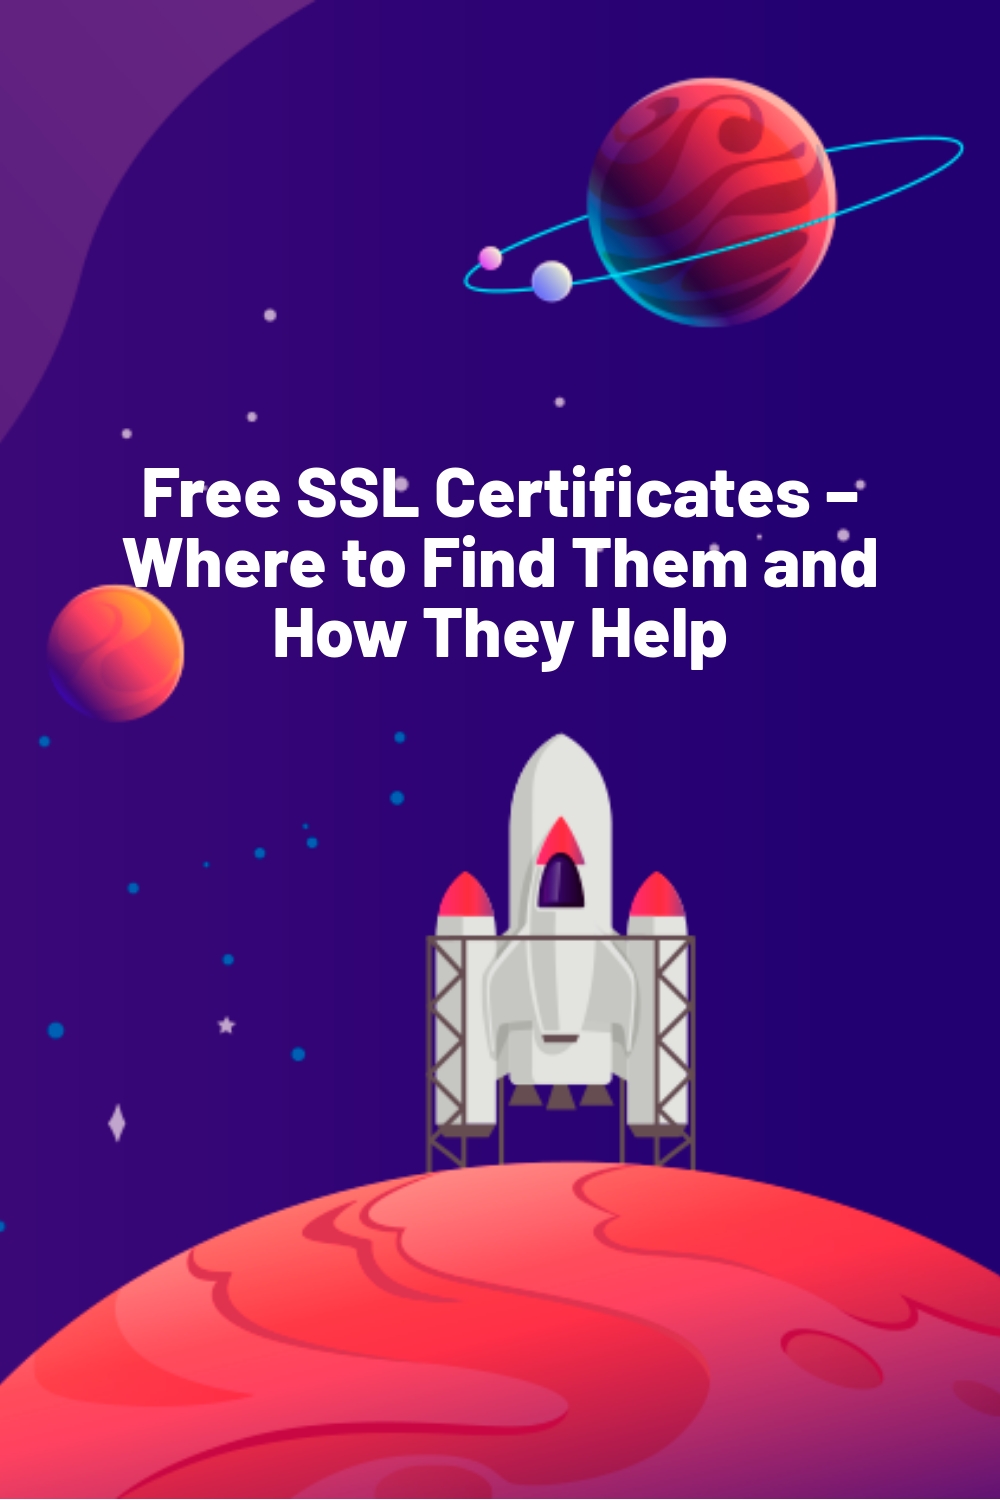 Free SSL Certificates – Where to Find Them and How They Help